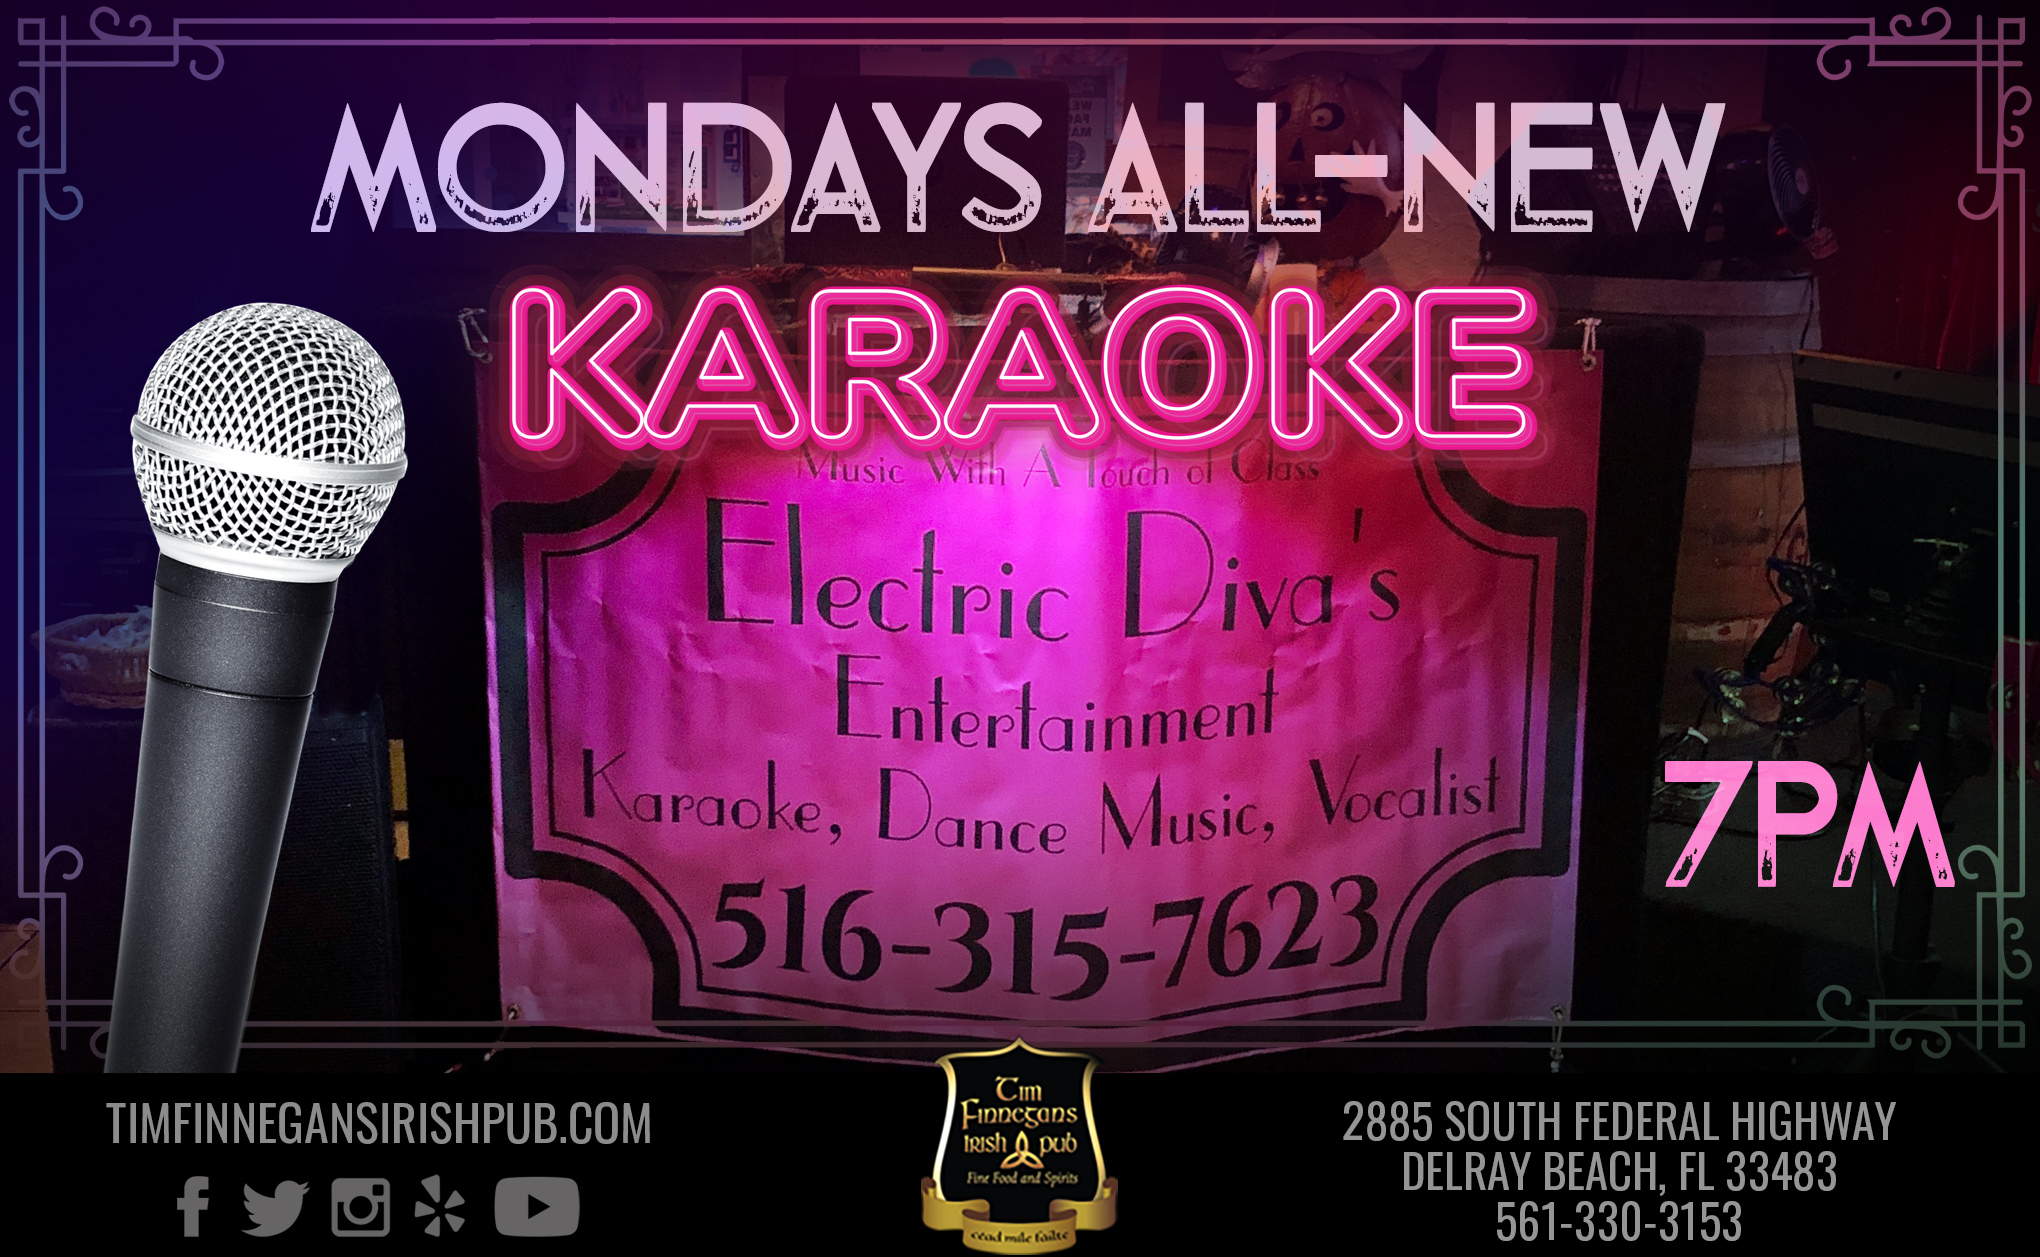 All new Karaoke Night with Dawn from Electric Diva Entertainment